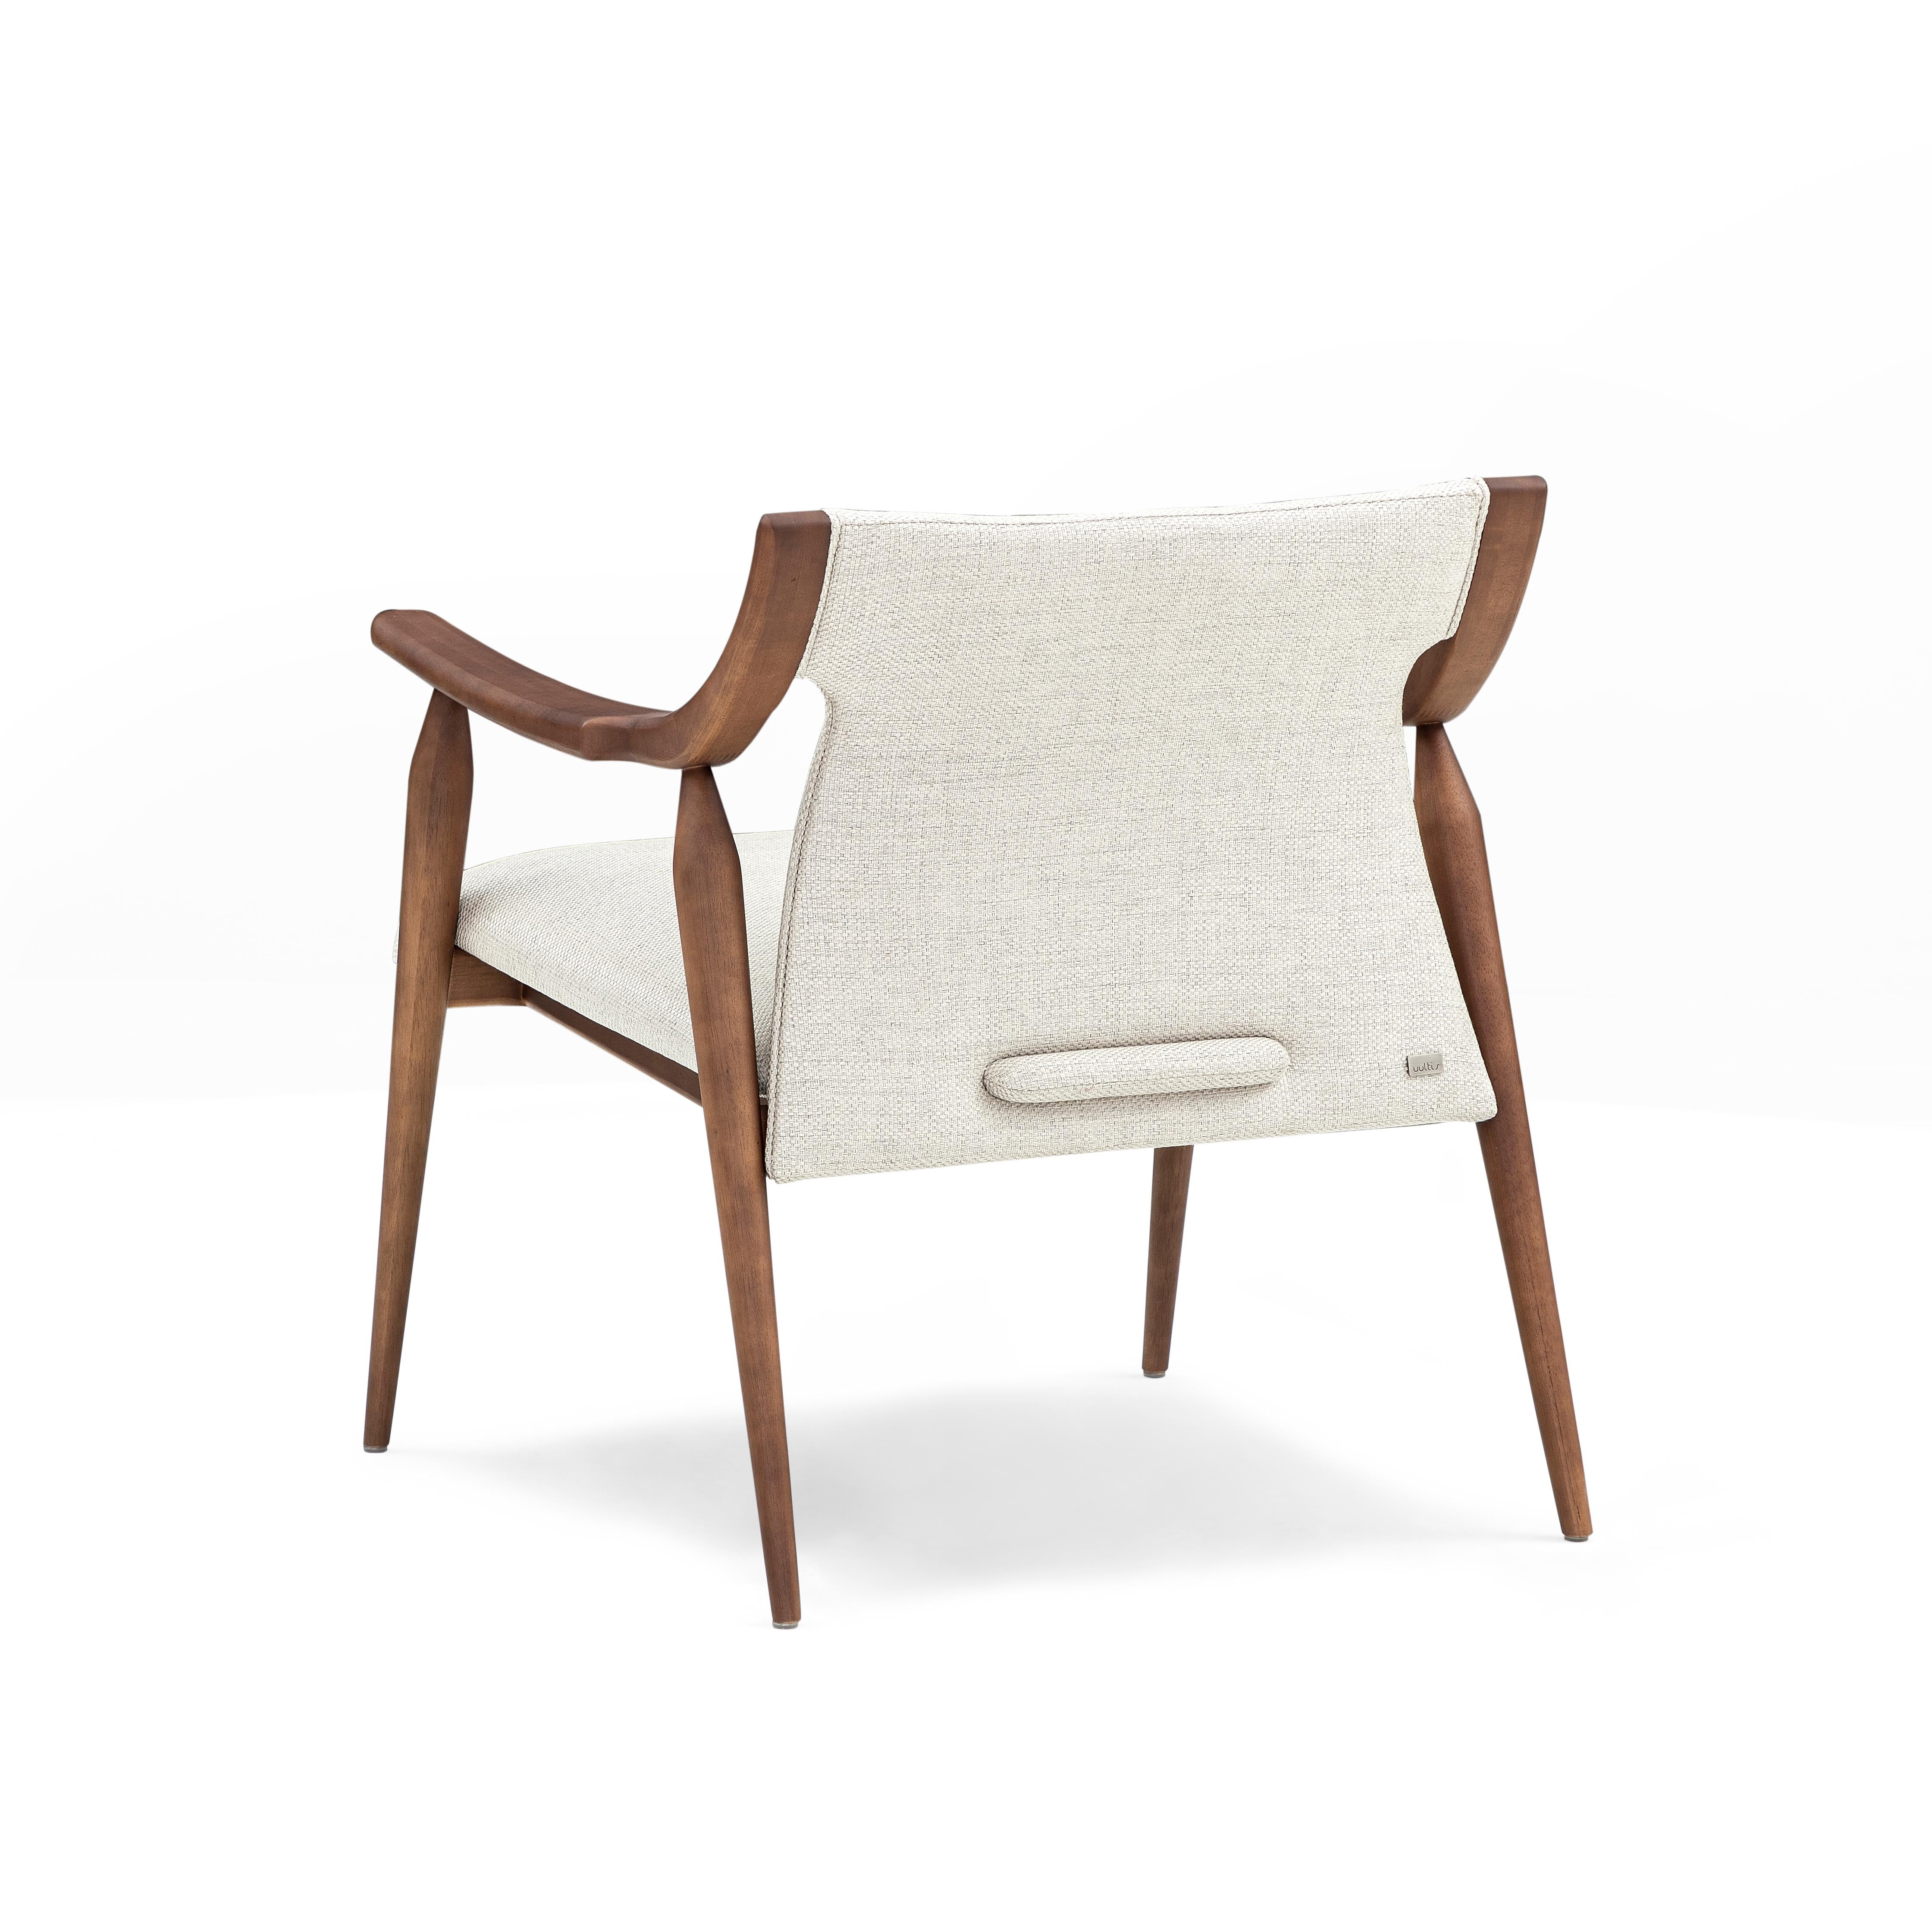 The Mince armchair is a welcoming addition to any room in your modern home decor with its walnut finish curved arms and spindle legs, and an off-white beautiful and soft fabric for the cushions. This modern chair has a clean minimalist simple design